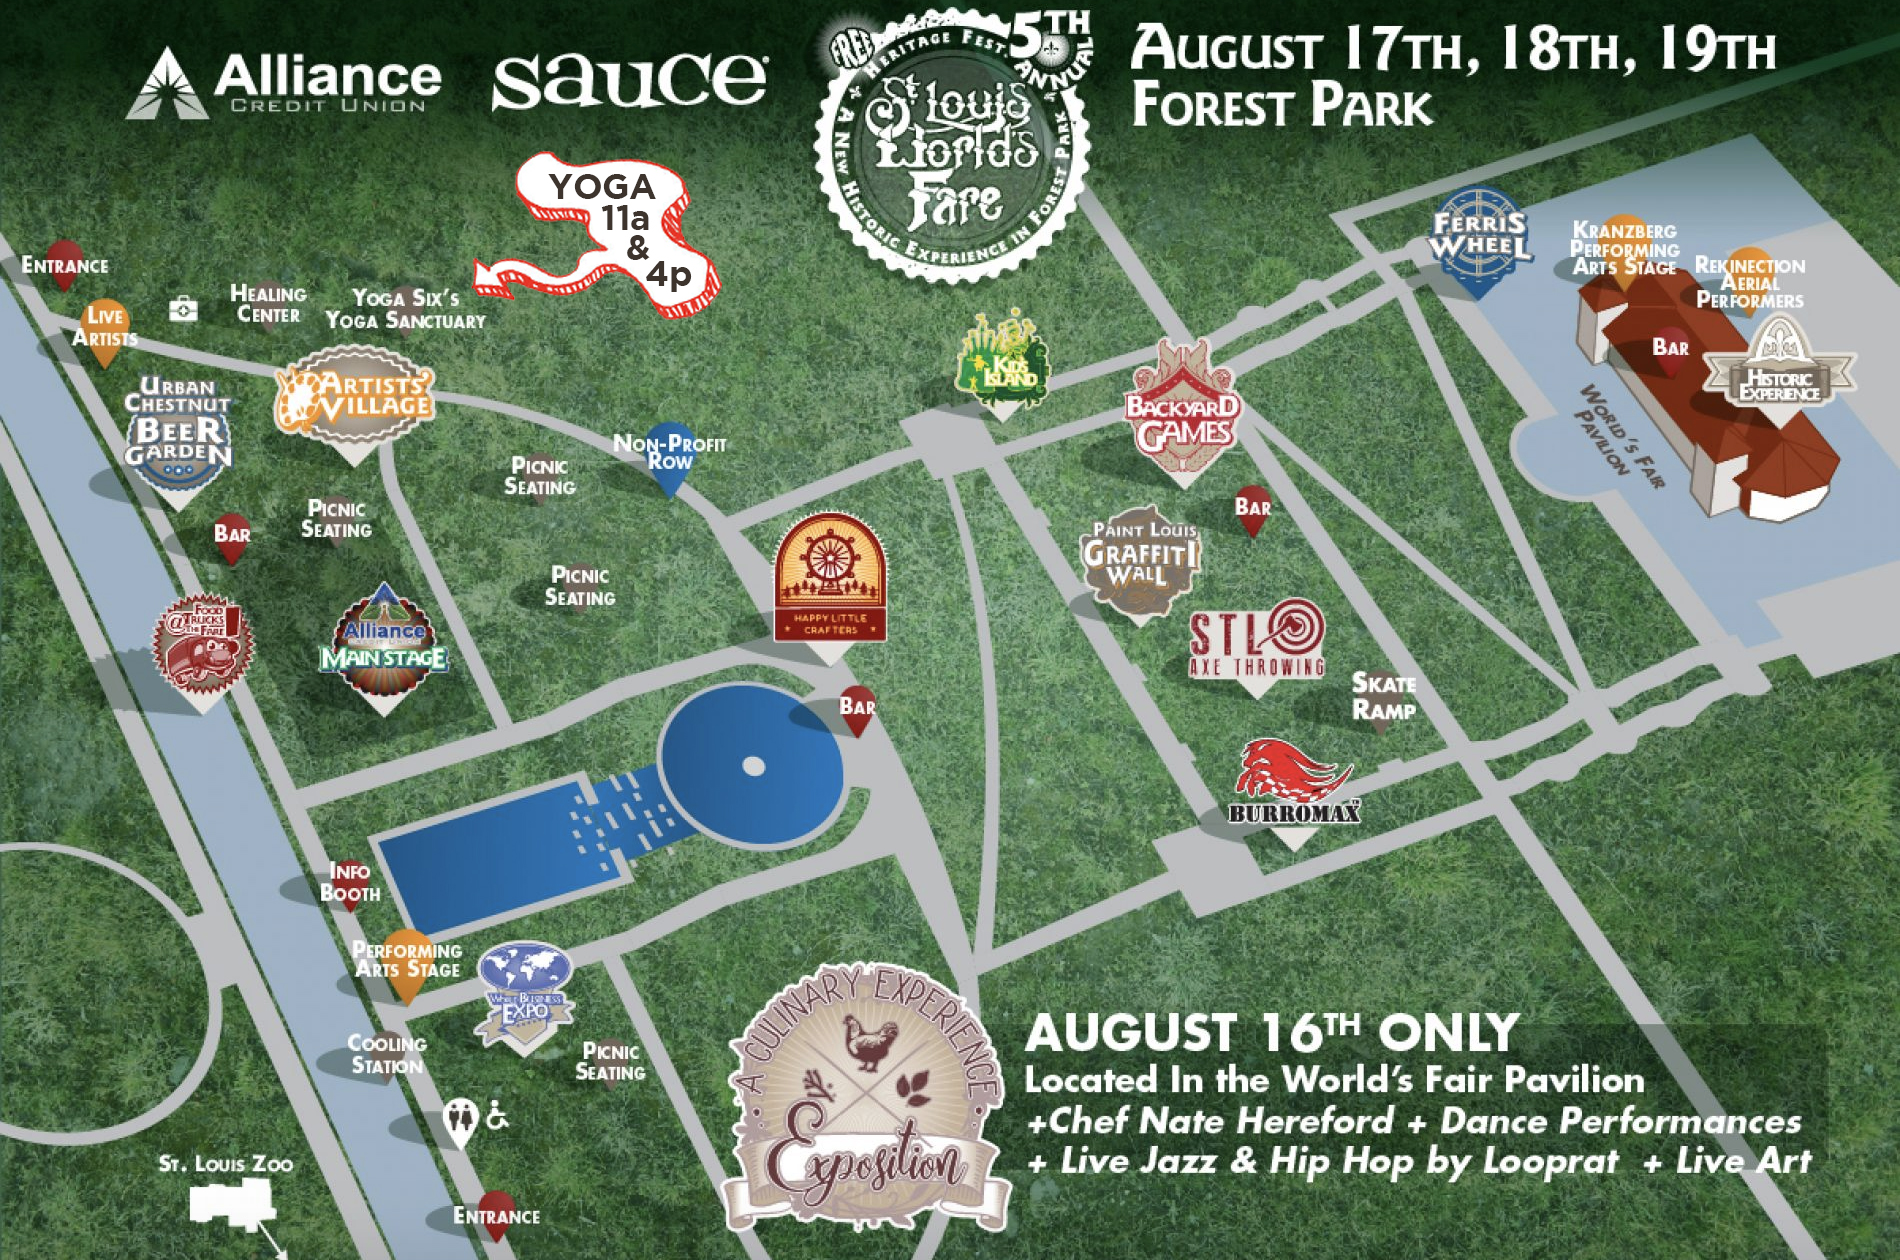 World's Fare Heritage Festival in Forest Park August 17, 18 & 19. Join Debby Siegel for yoga Saturday and Sunday at 4pm.